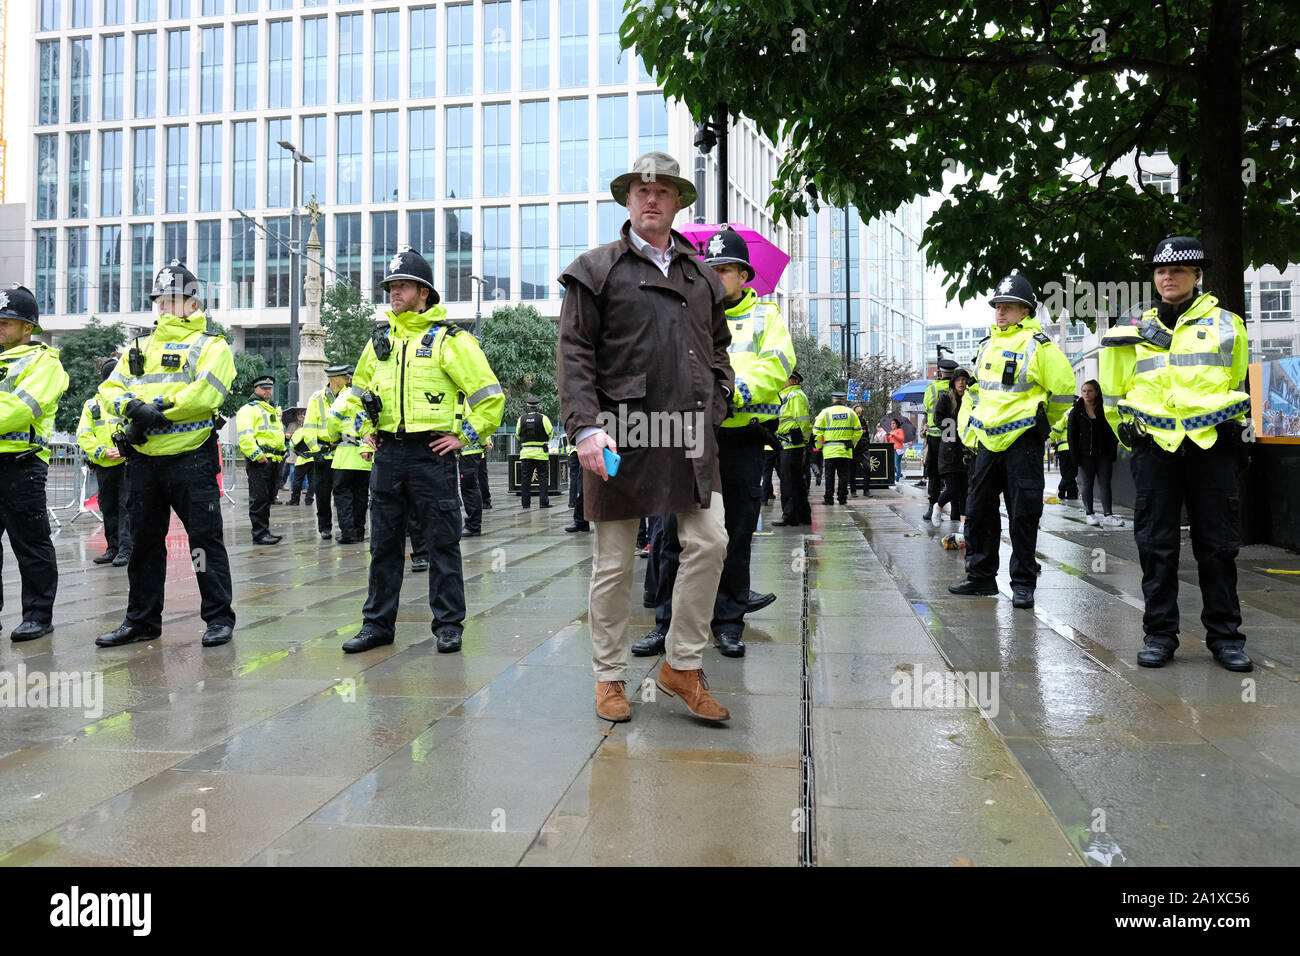 Manchester, UK.  Sunday 29th September 2019.  Delegates arrive in the rain at the Conservative Party Conference on the opening day of the Tory event.  Photo Steven May / Alamy Live News Stock Photo